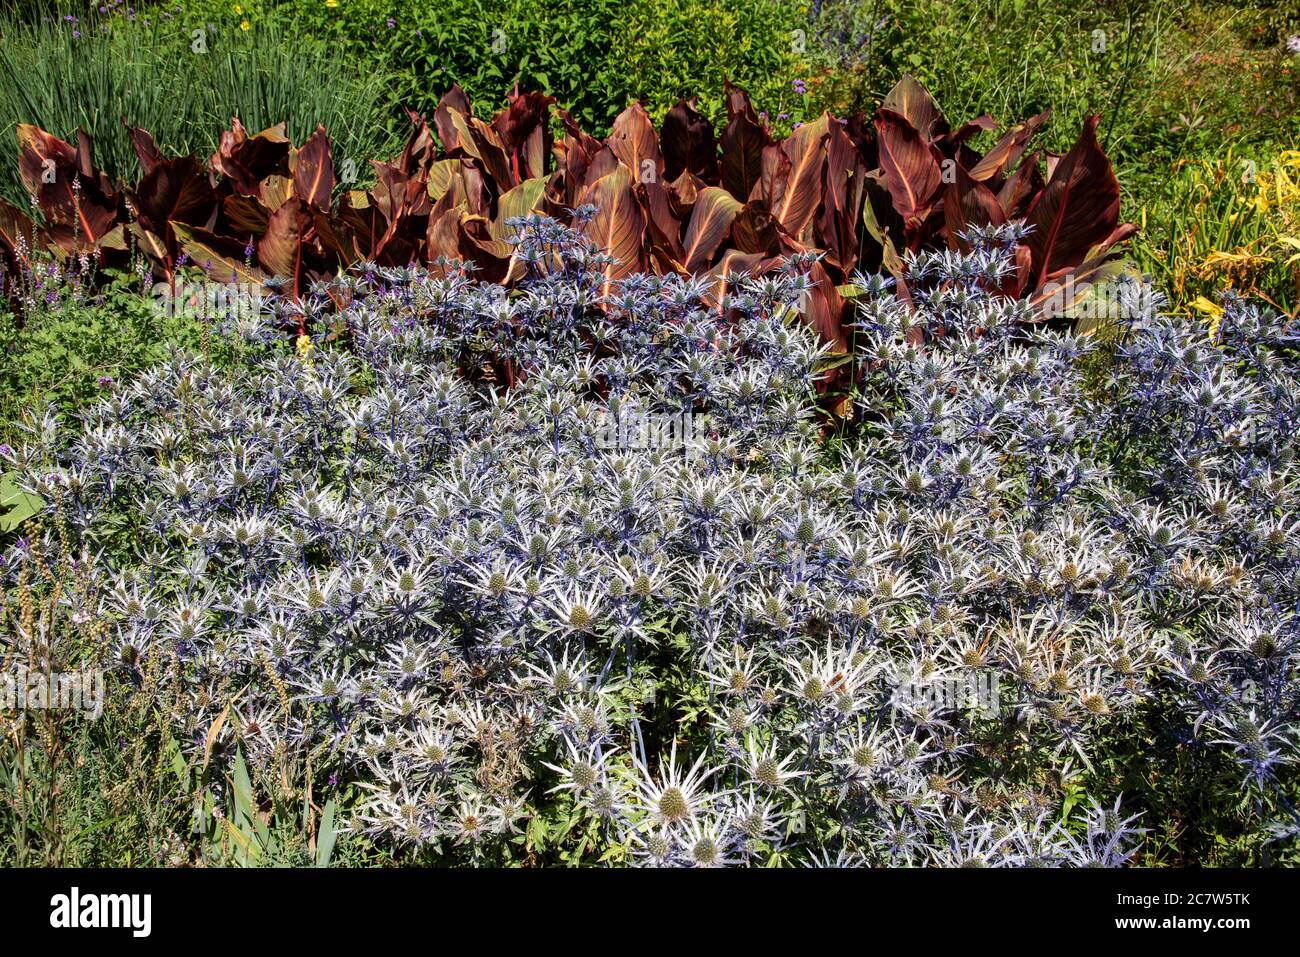 Hampshire, England, UK. 2020. A mass of Eryngium 'Blue Waves' in bloom in  an English country garden. Sometimes called Sea Holly. Stock Photo